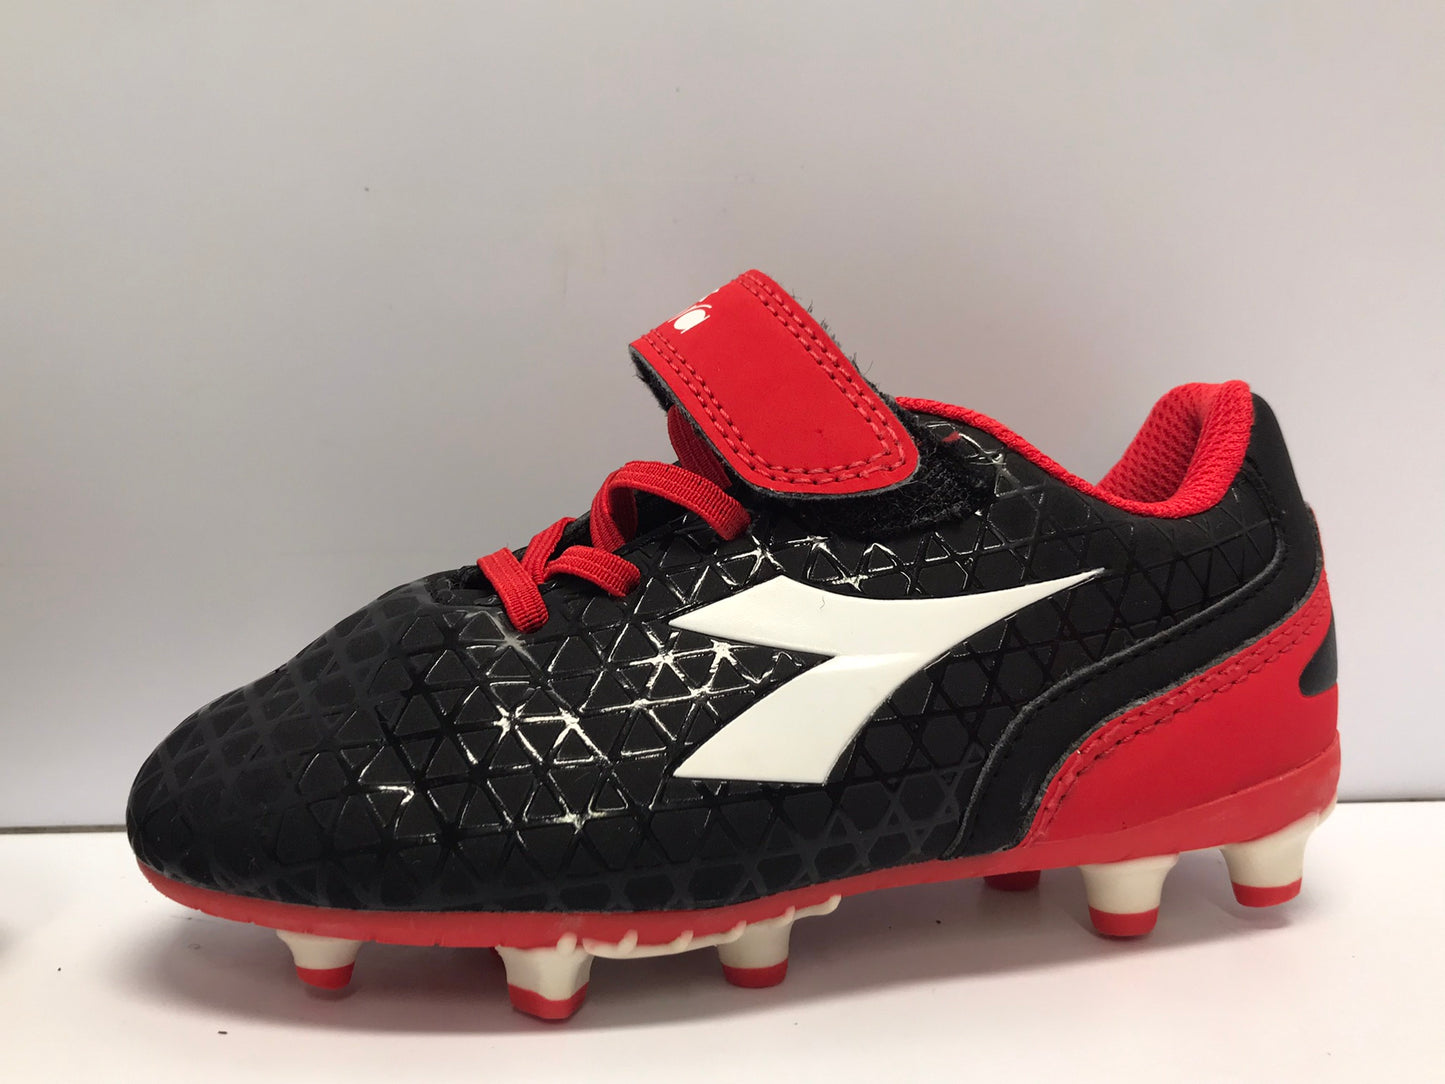 Soccer Shoes Cleats Child size 11 Toddler Diadora Red Black Like New